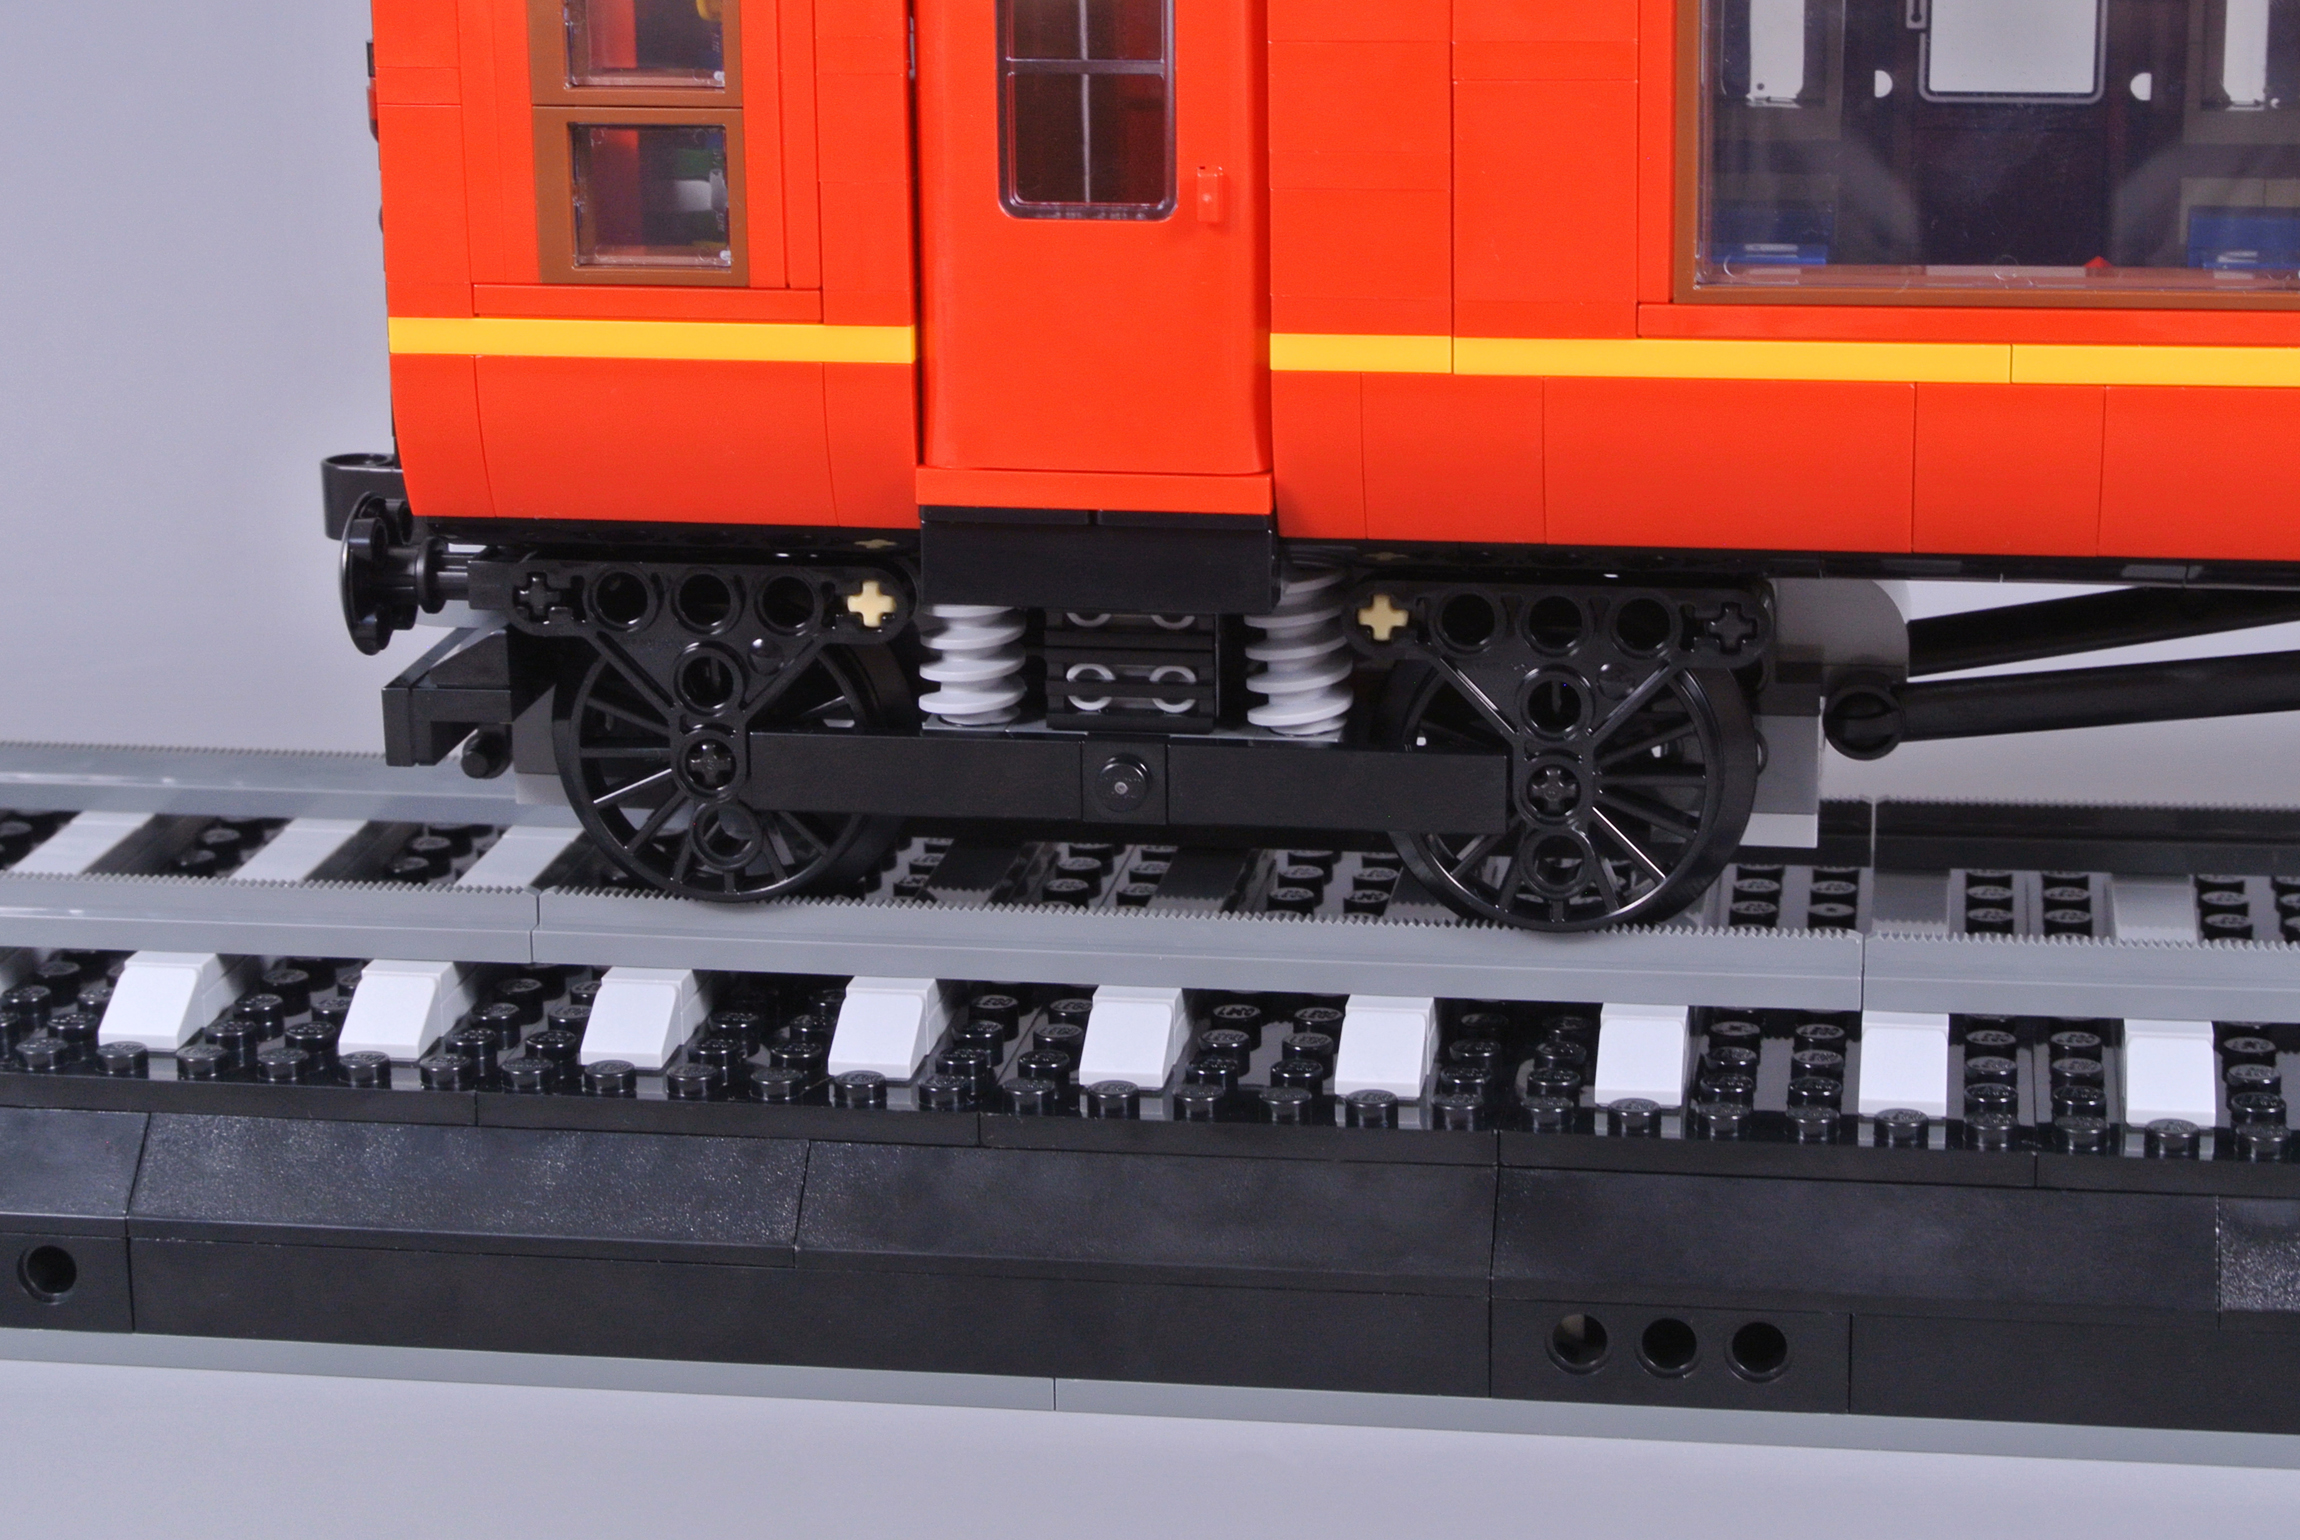 Is this worth $500?  LEGO Harry Potter Hogwarts Express REVIEW